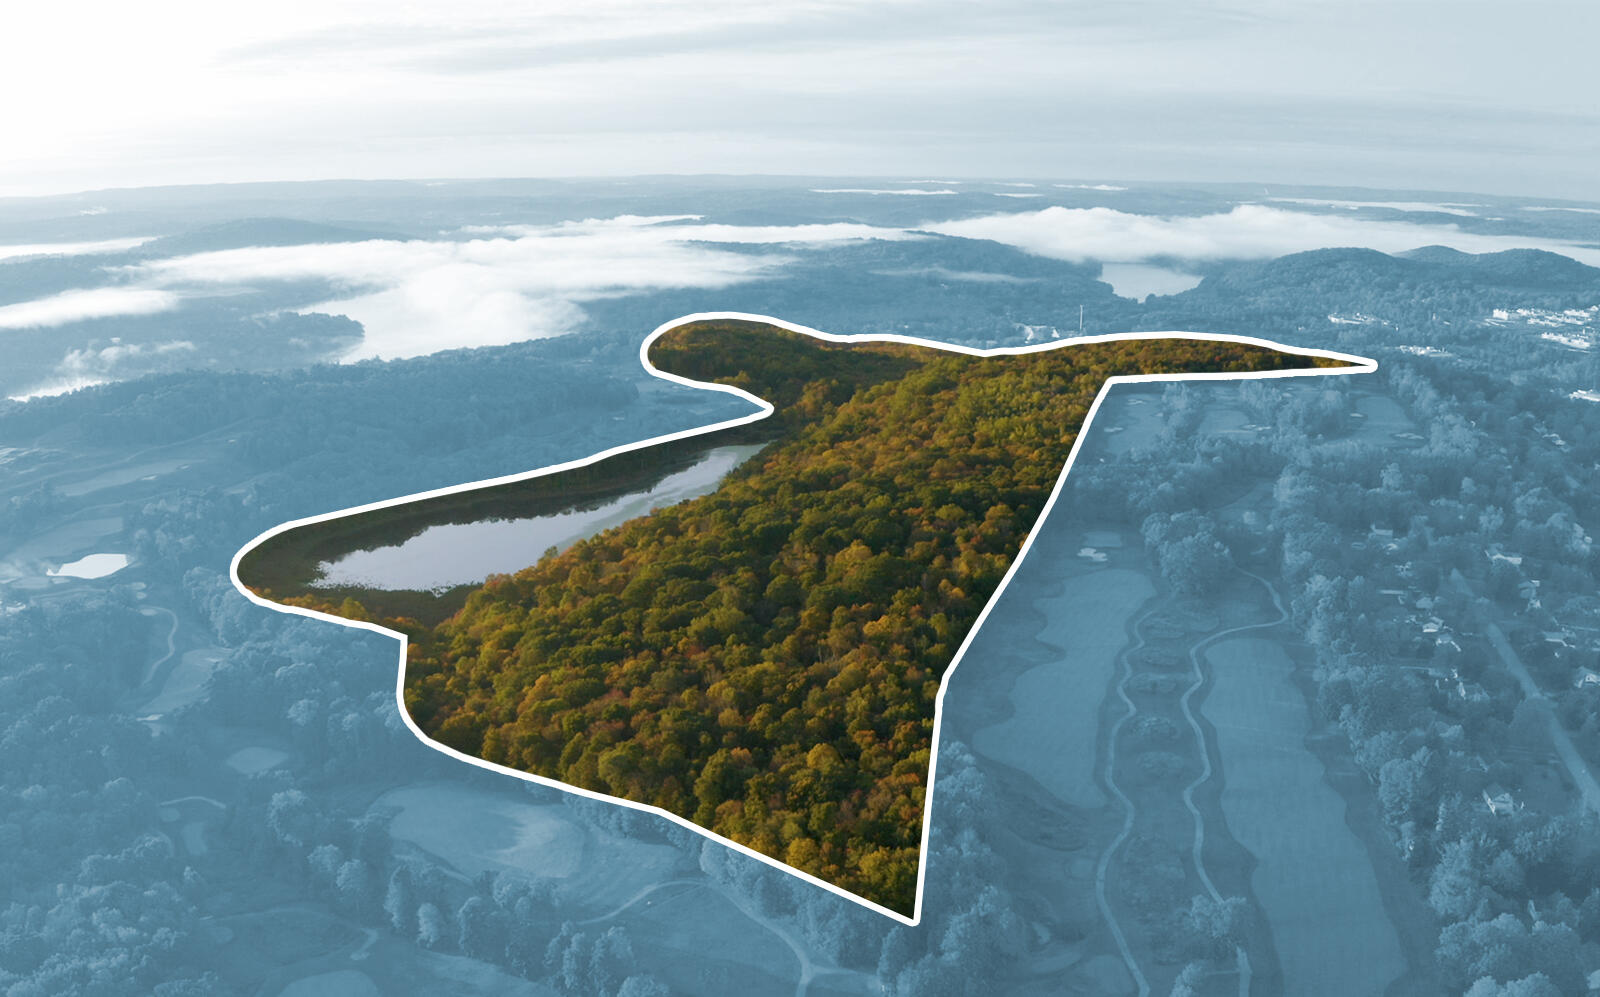 The 144-acre property is located in Lower Hudson Valley. (Institutional Property Advisors)